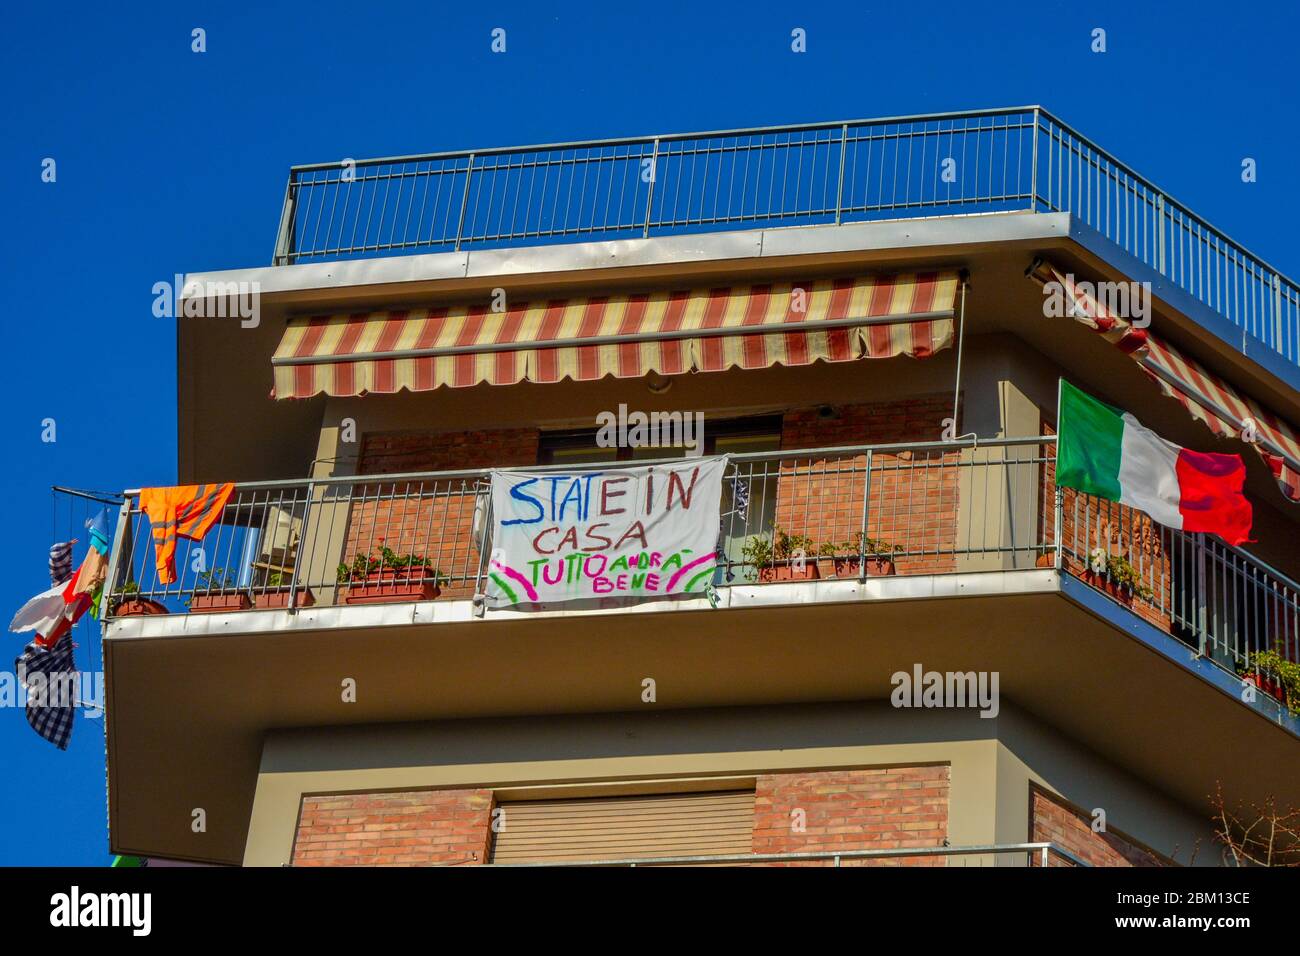 Positive message on a banner from balcony 'Stay home, everything is gonna be alright',the italian flag waving and hanging clothes.Encouragement text Stock Photo